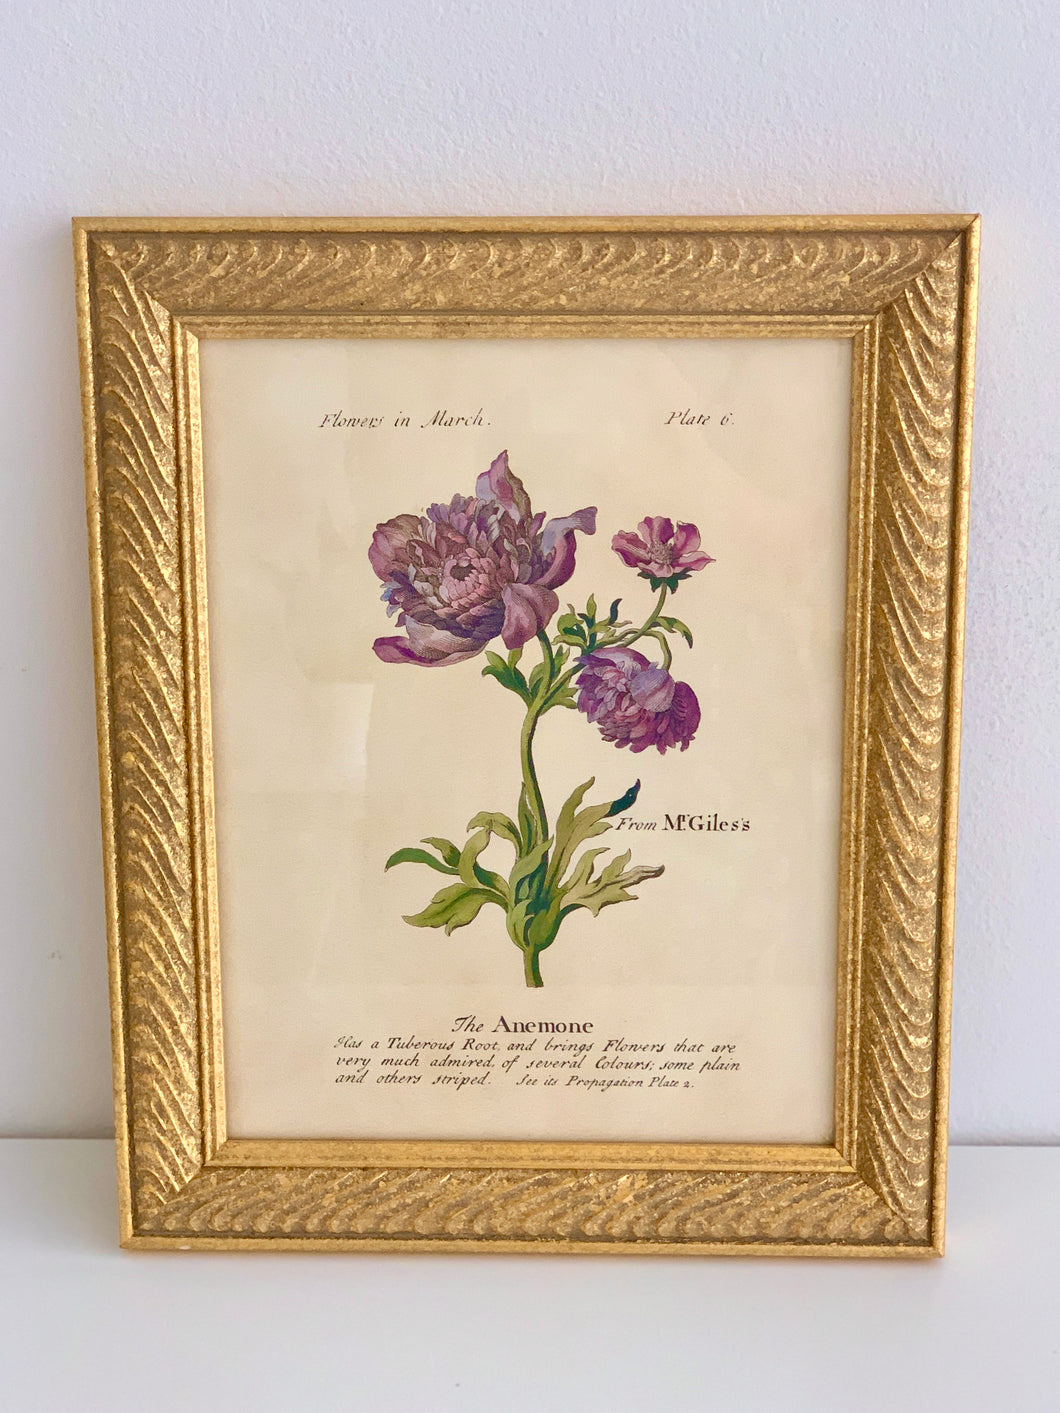 Framed “Flowers in March” Print